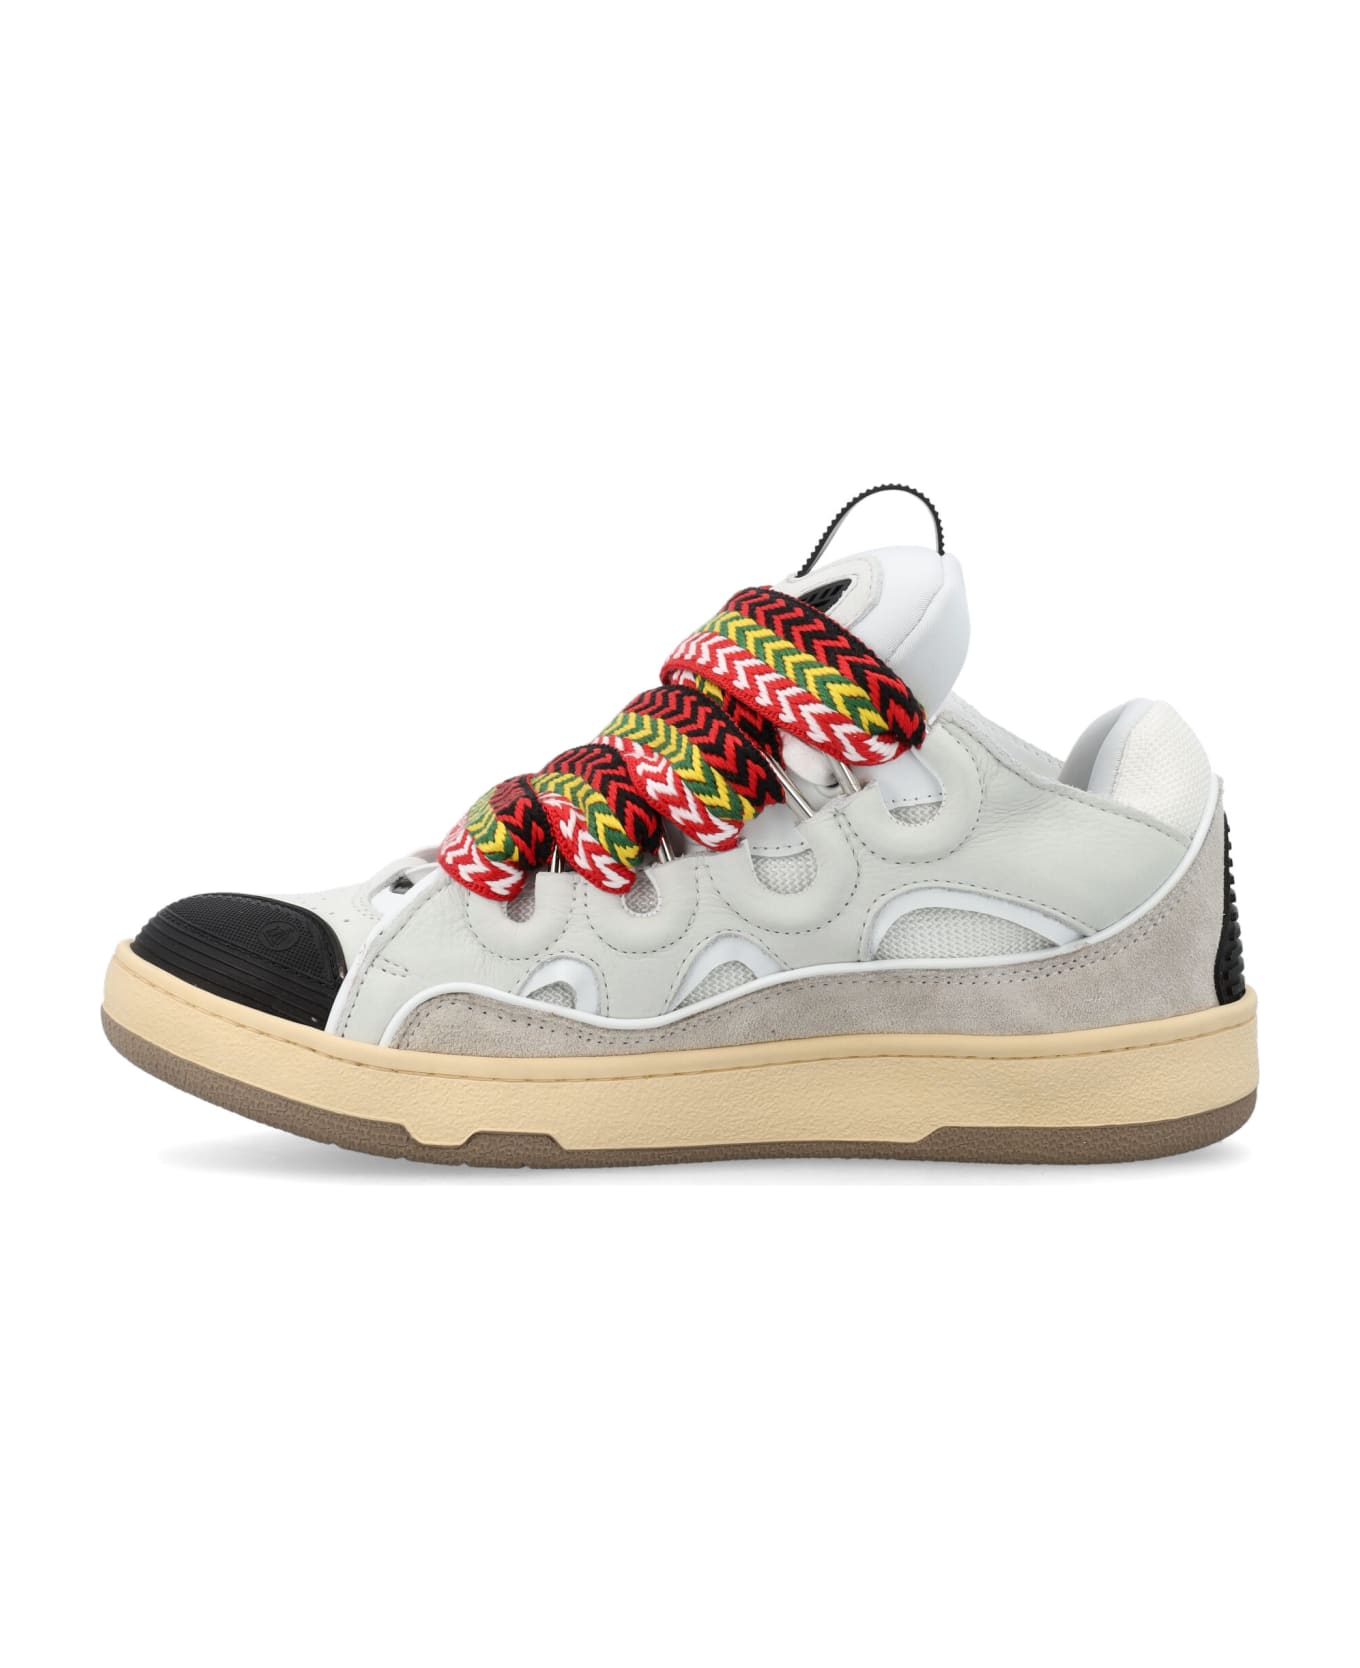 Lanvin Leather Curb Sneakers - WHITE スニーカー